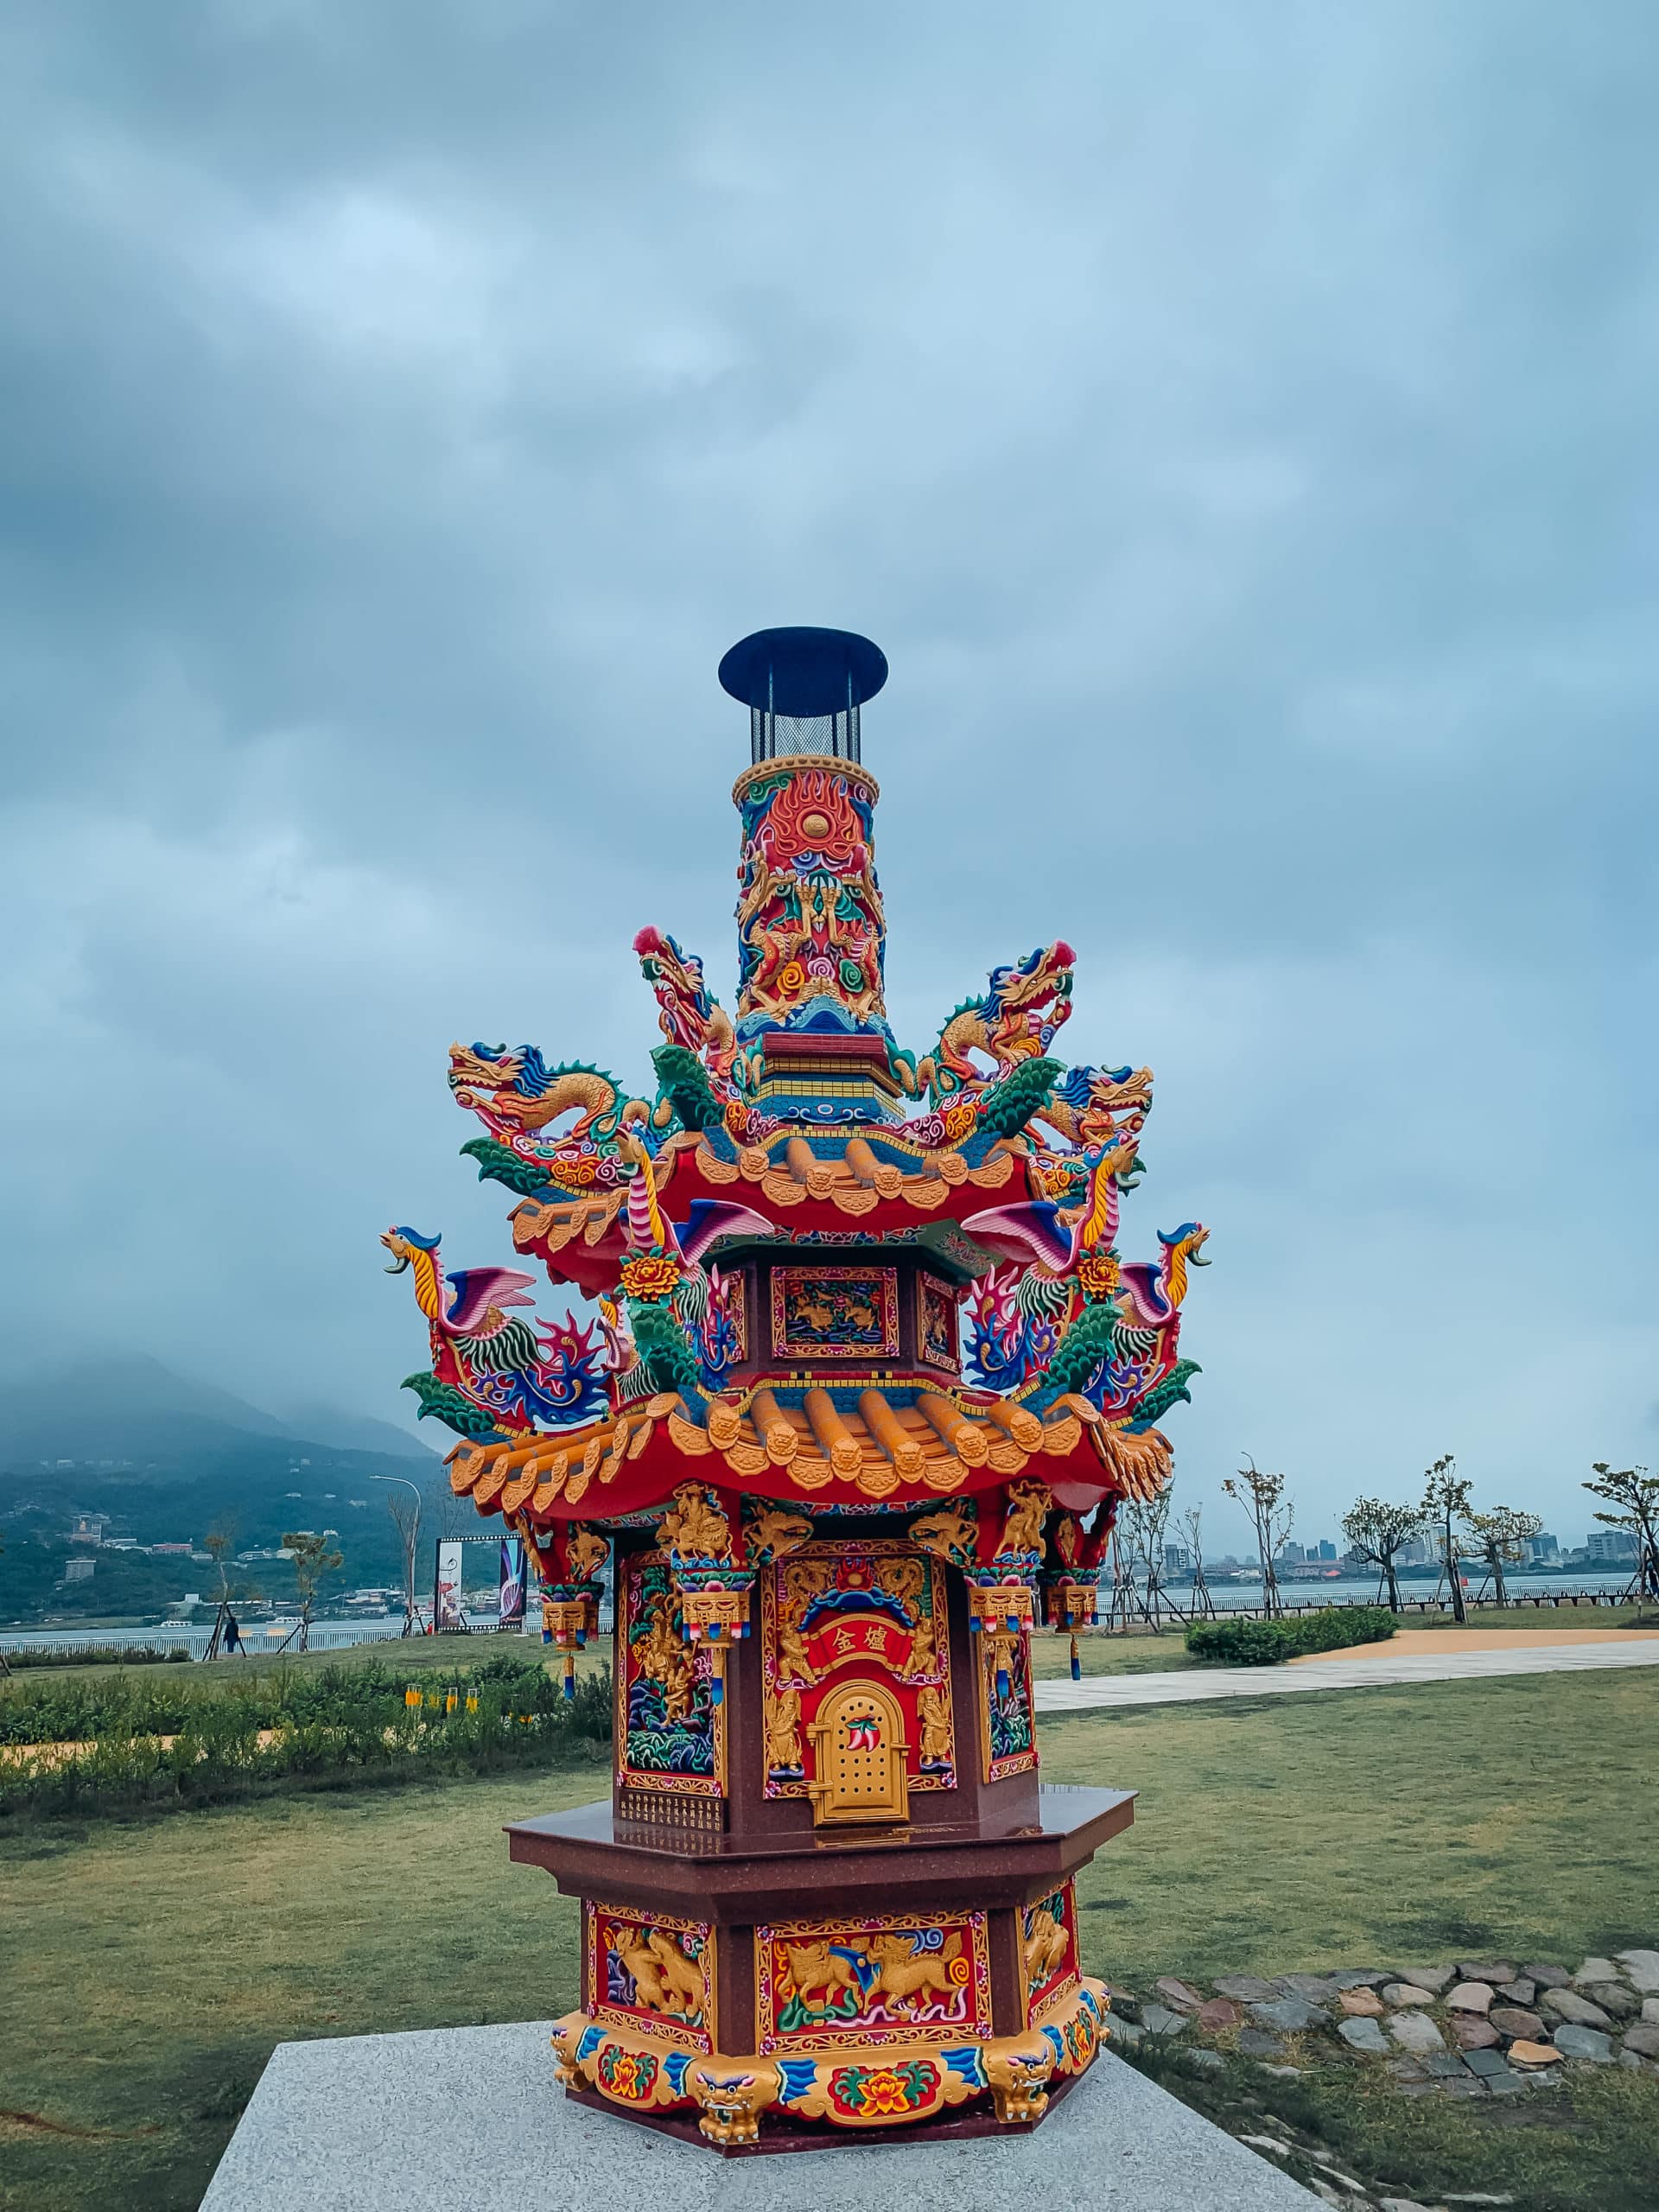 Decorative Art at the Tamsui Waterfront Walk